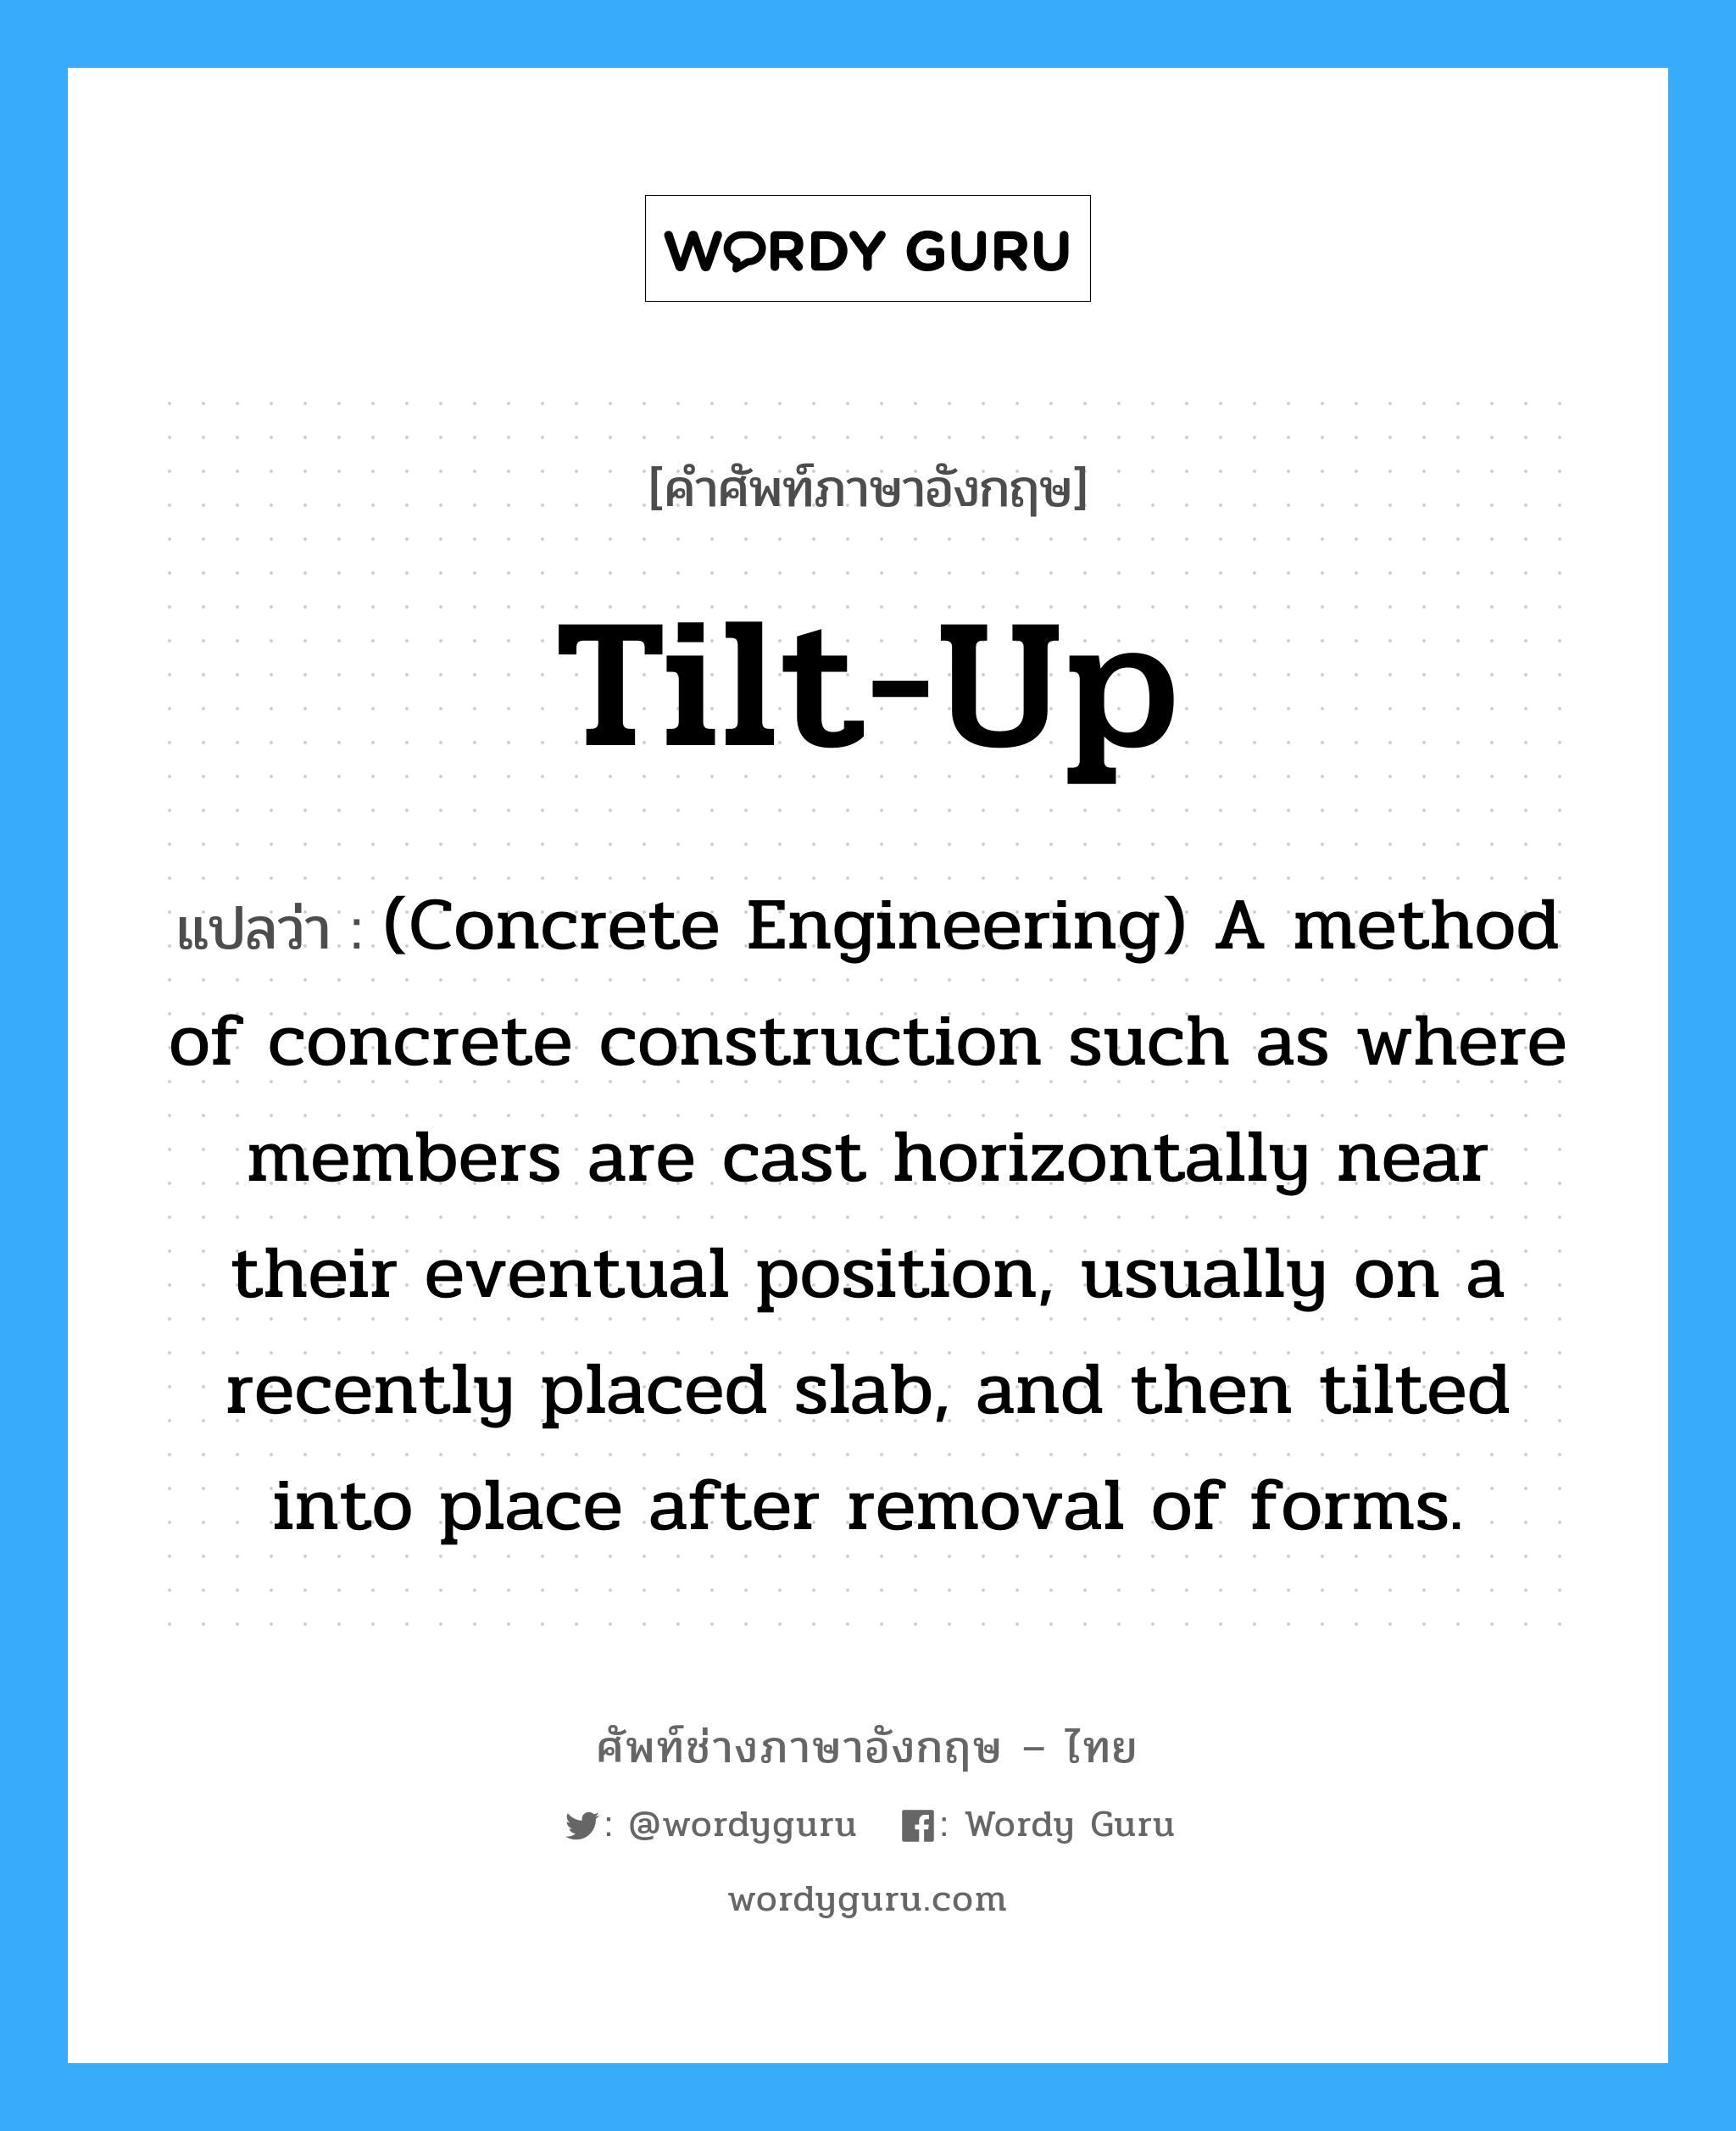 Tilt-up แปลว่า?, คำศัพท์ช่างภาษาอังกฤษ - ไทย Tilt-up คำศัพท์ภาษาอังกฤษ Tilt-up แปลว่า (Concrete Engineering) A method of concrete construction such as where members are cast horizontally near their eventual position, usually on a recently placed slab, and then tilted into place after removal of forms.